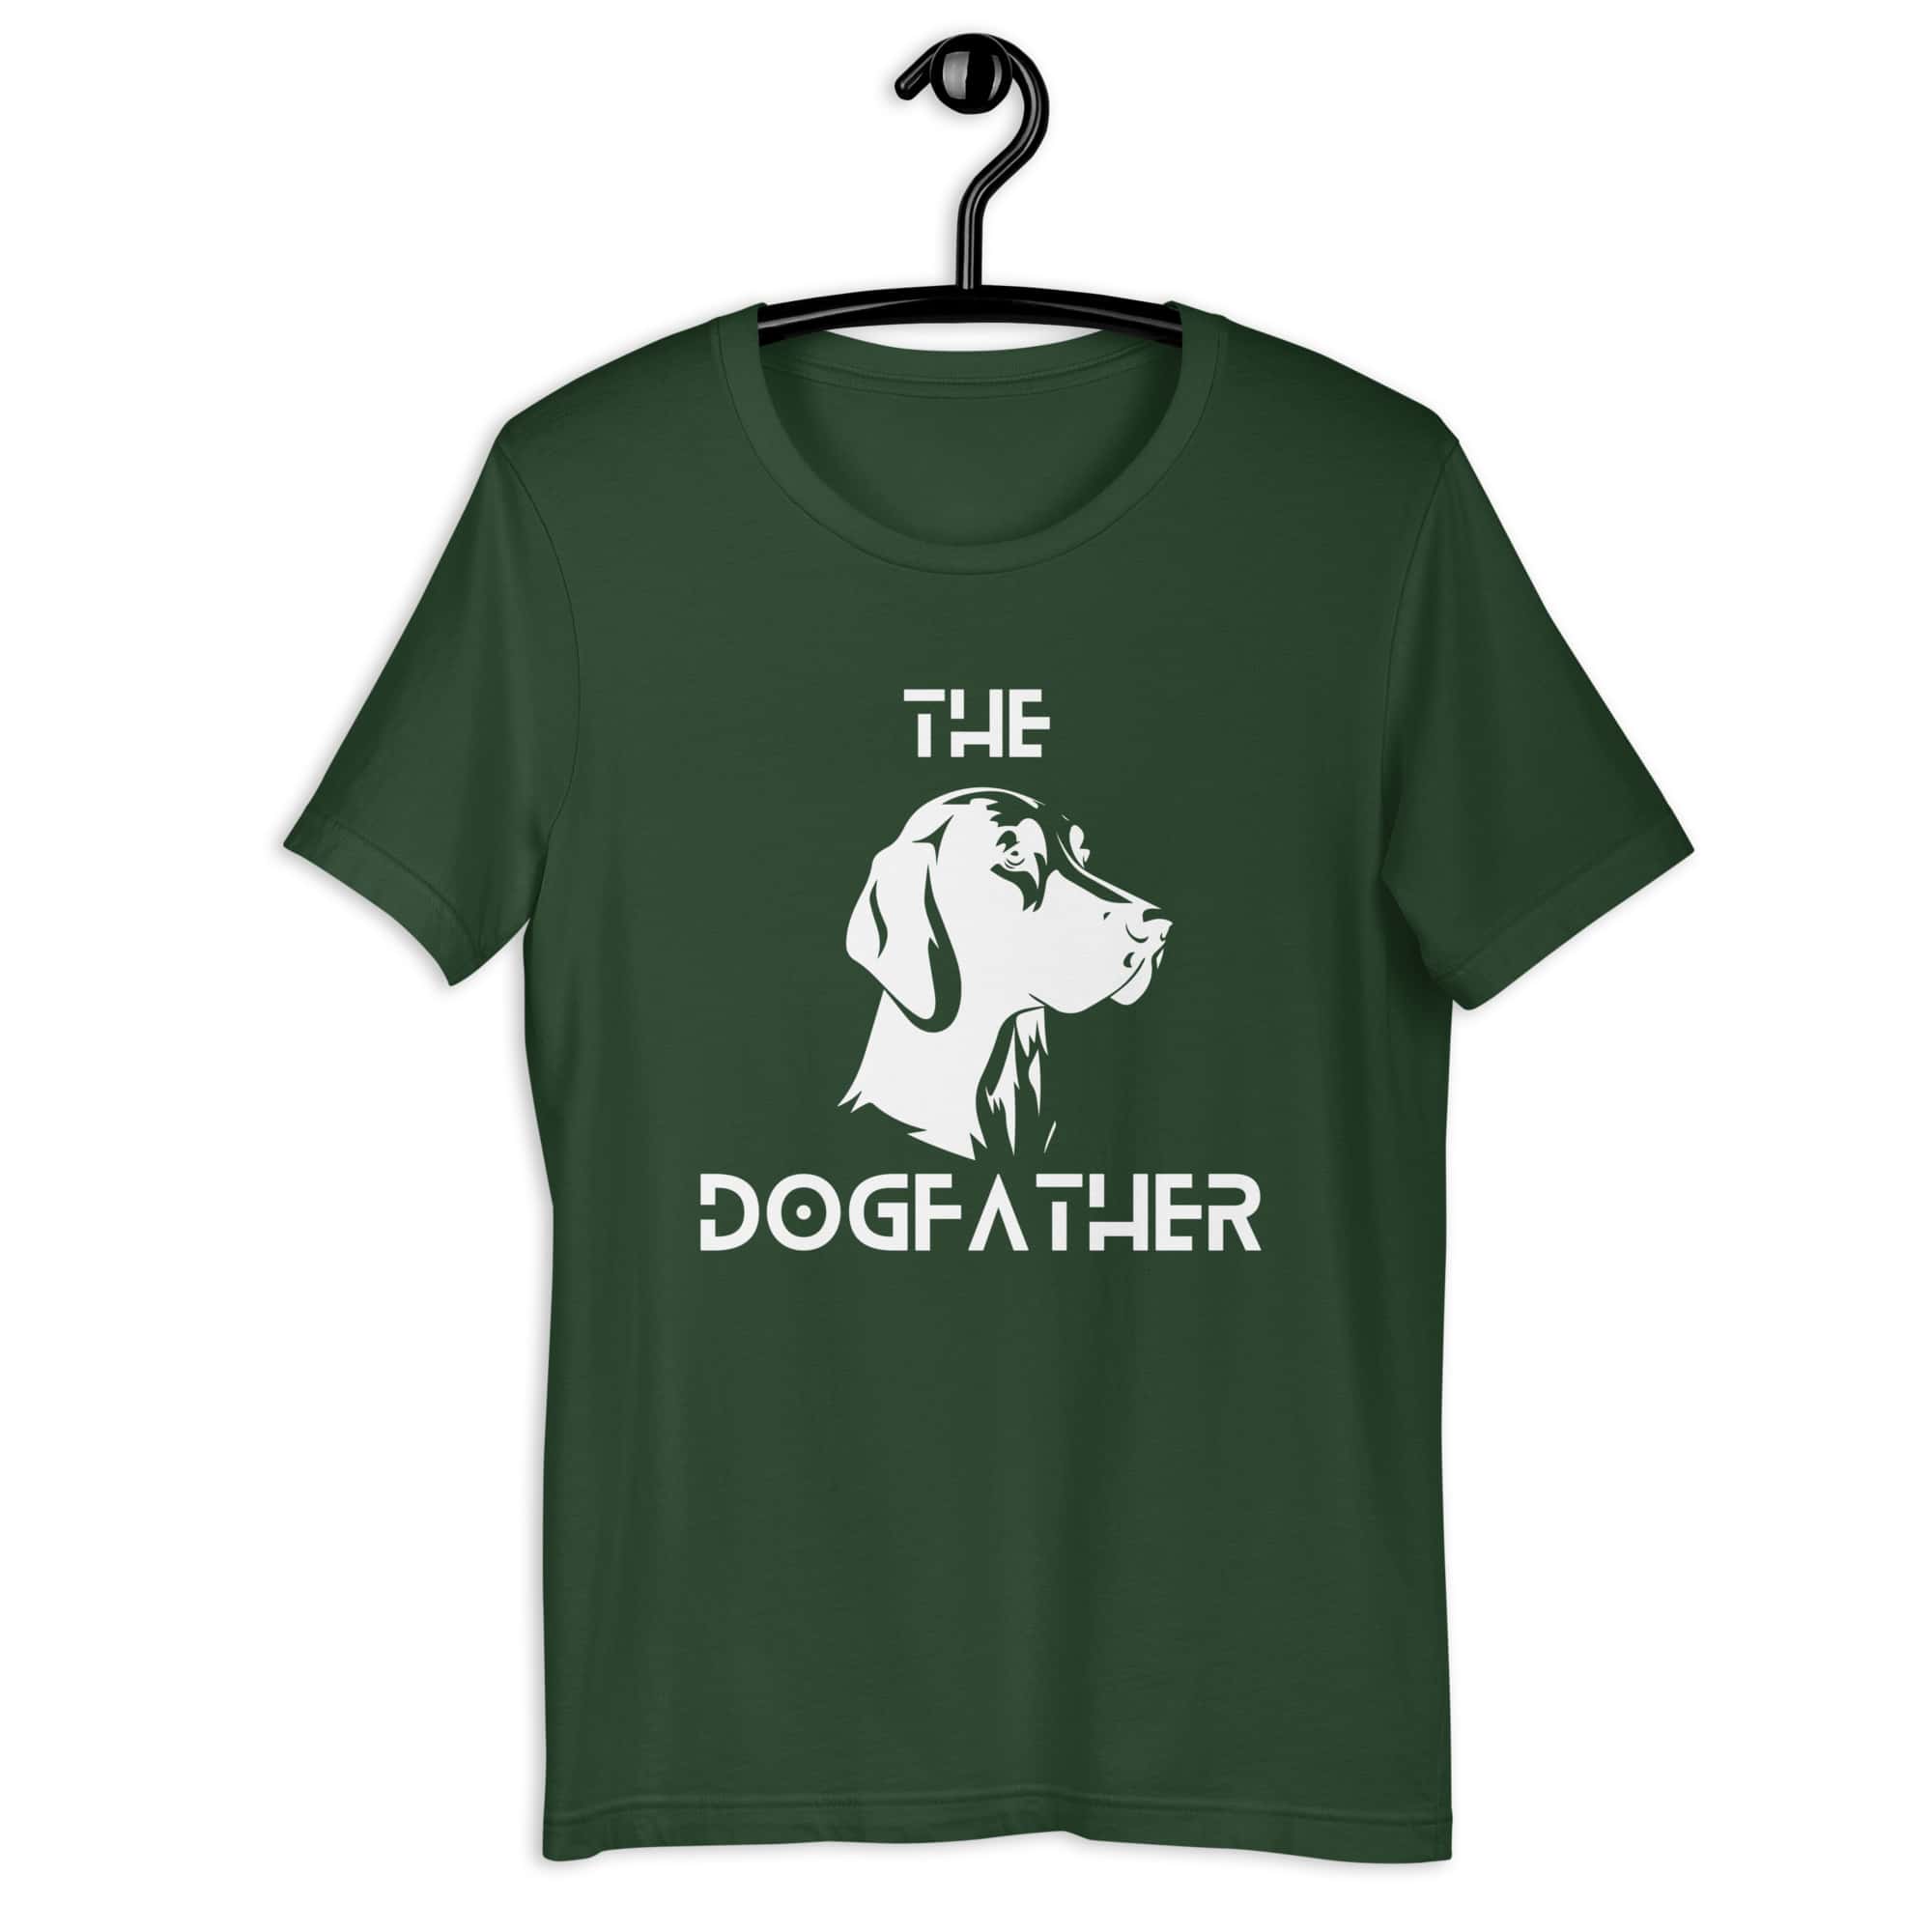 The Dogfather Retrievers Unisex T-Shirt. Forest